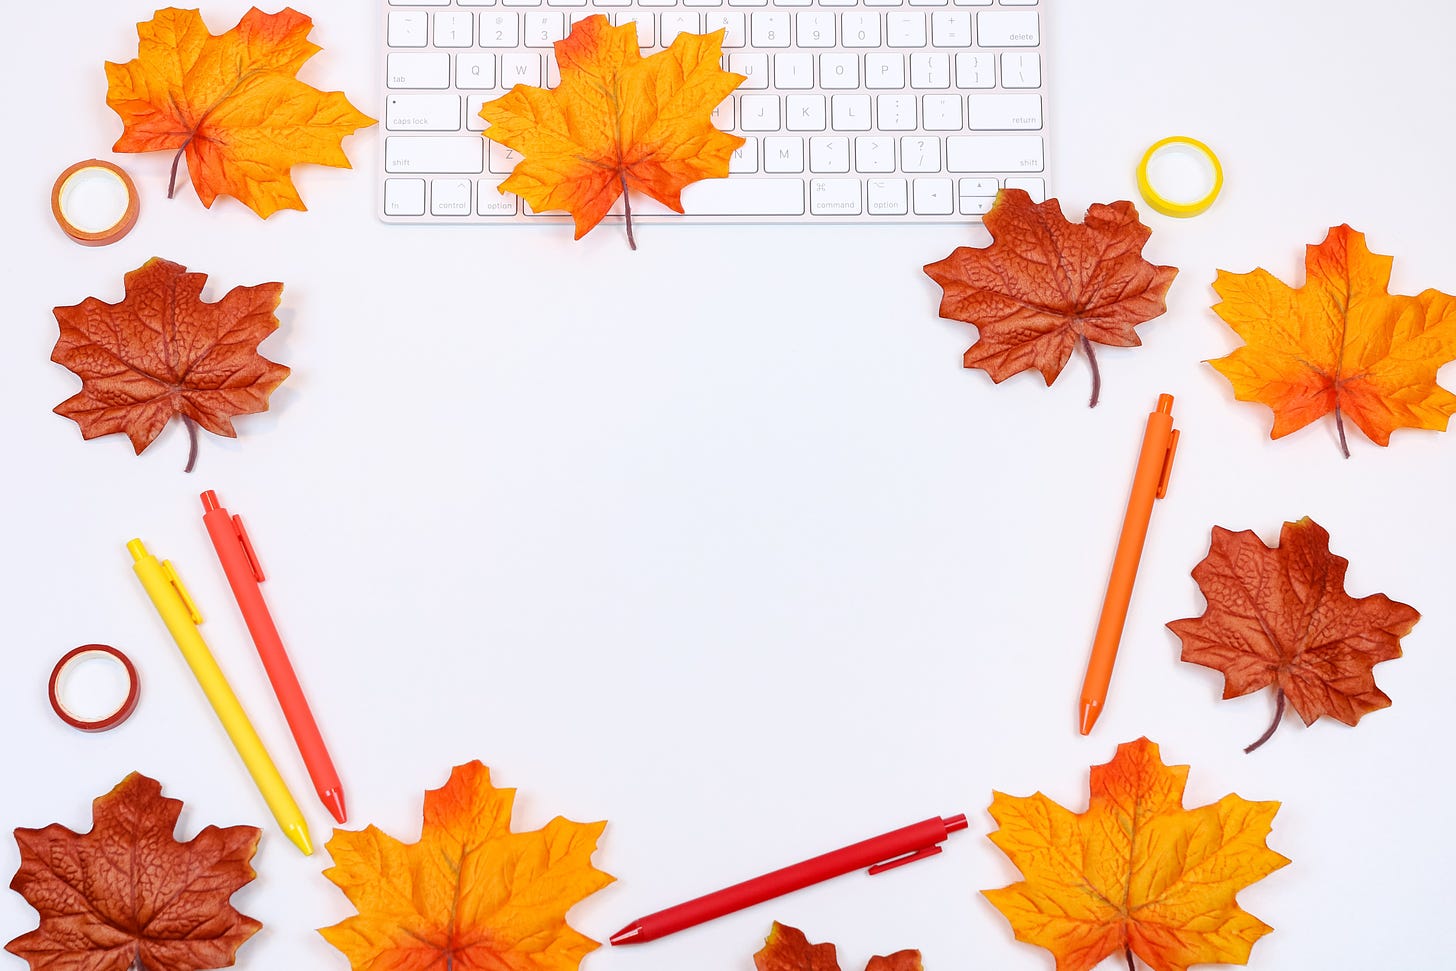 autumn leaves, pens in autumnal colors, and a computer keyboard